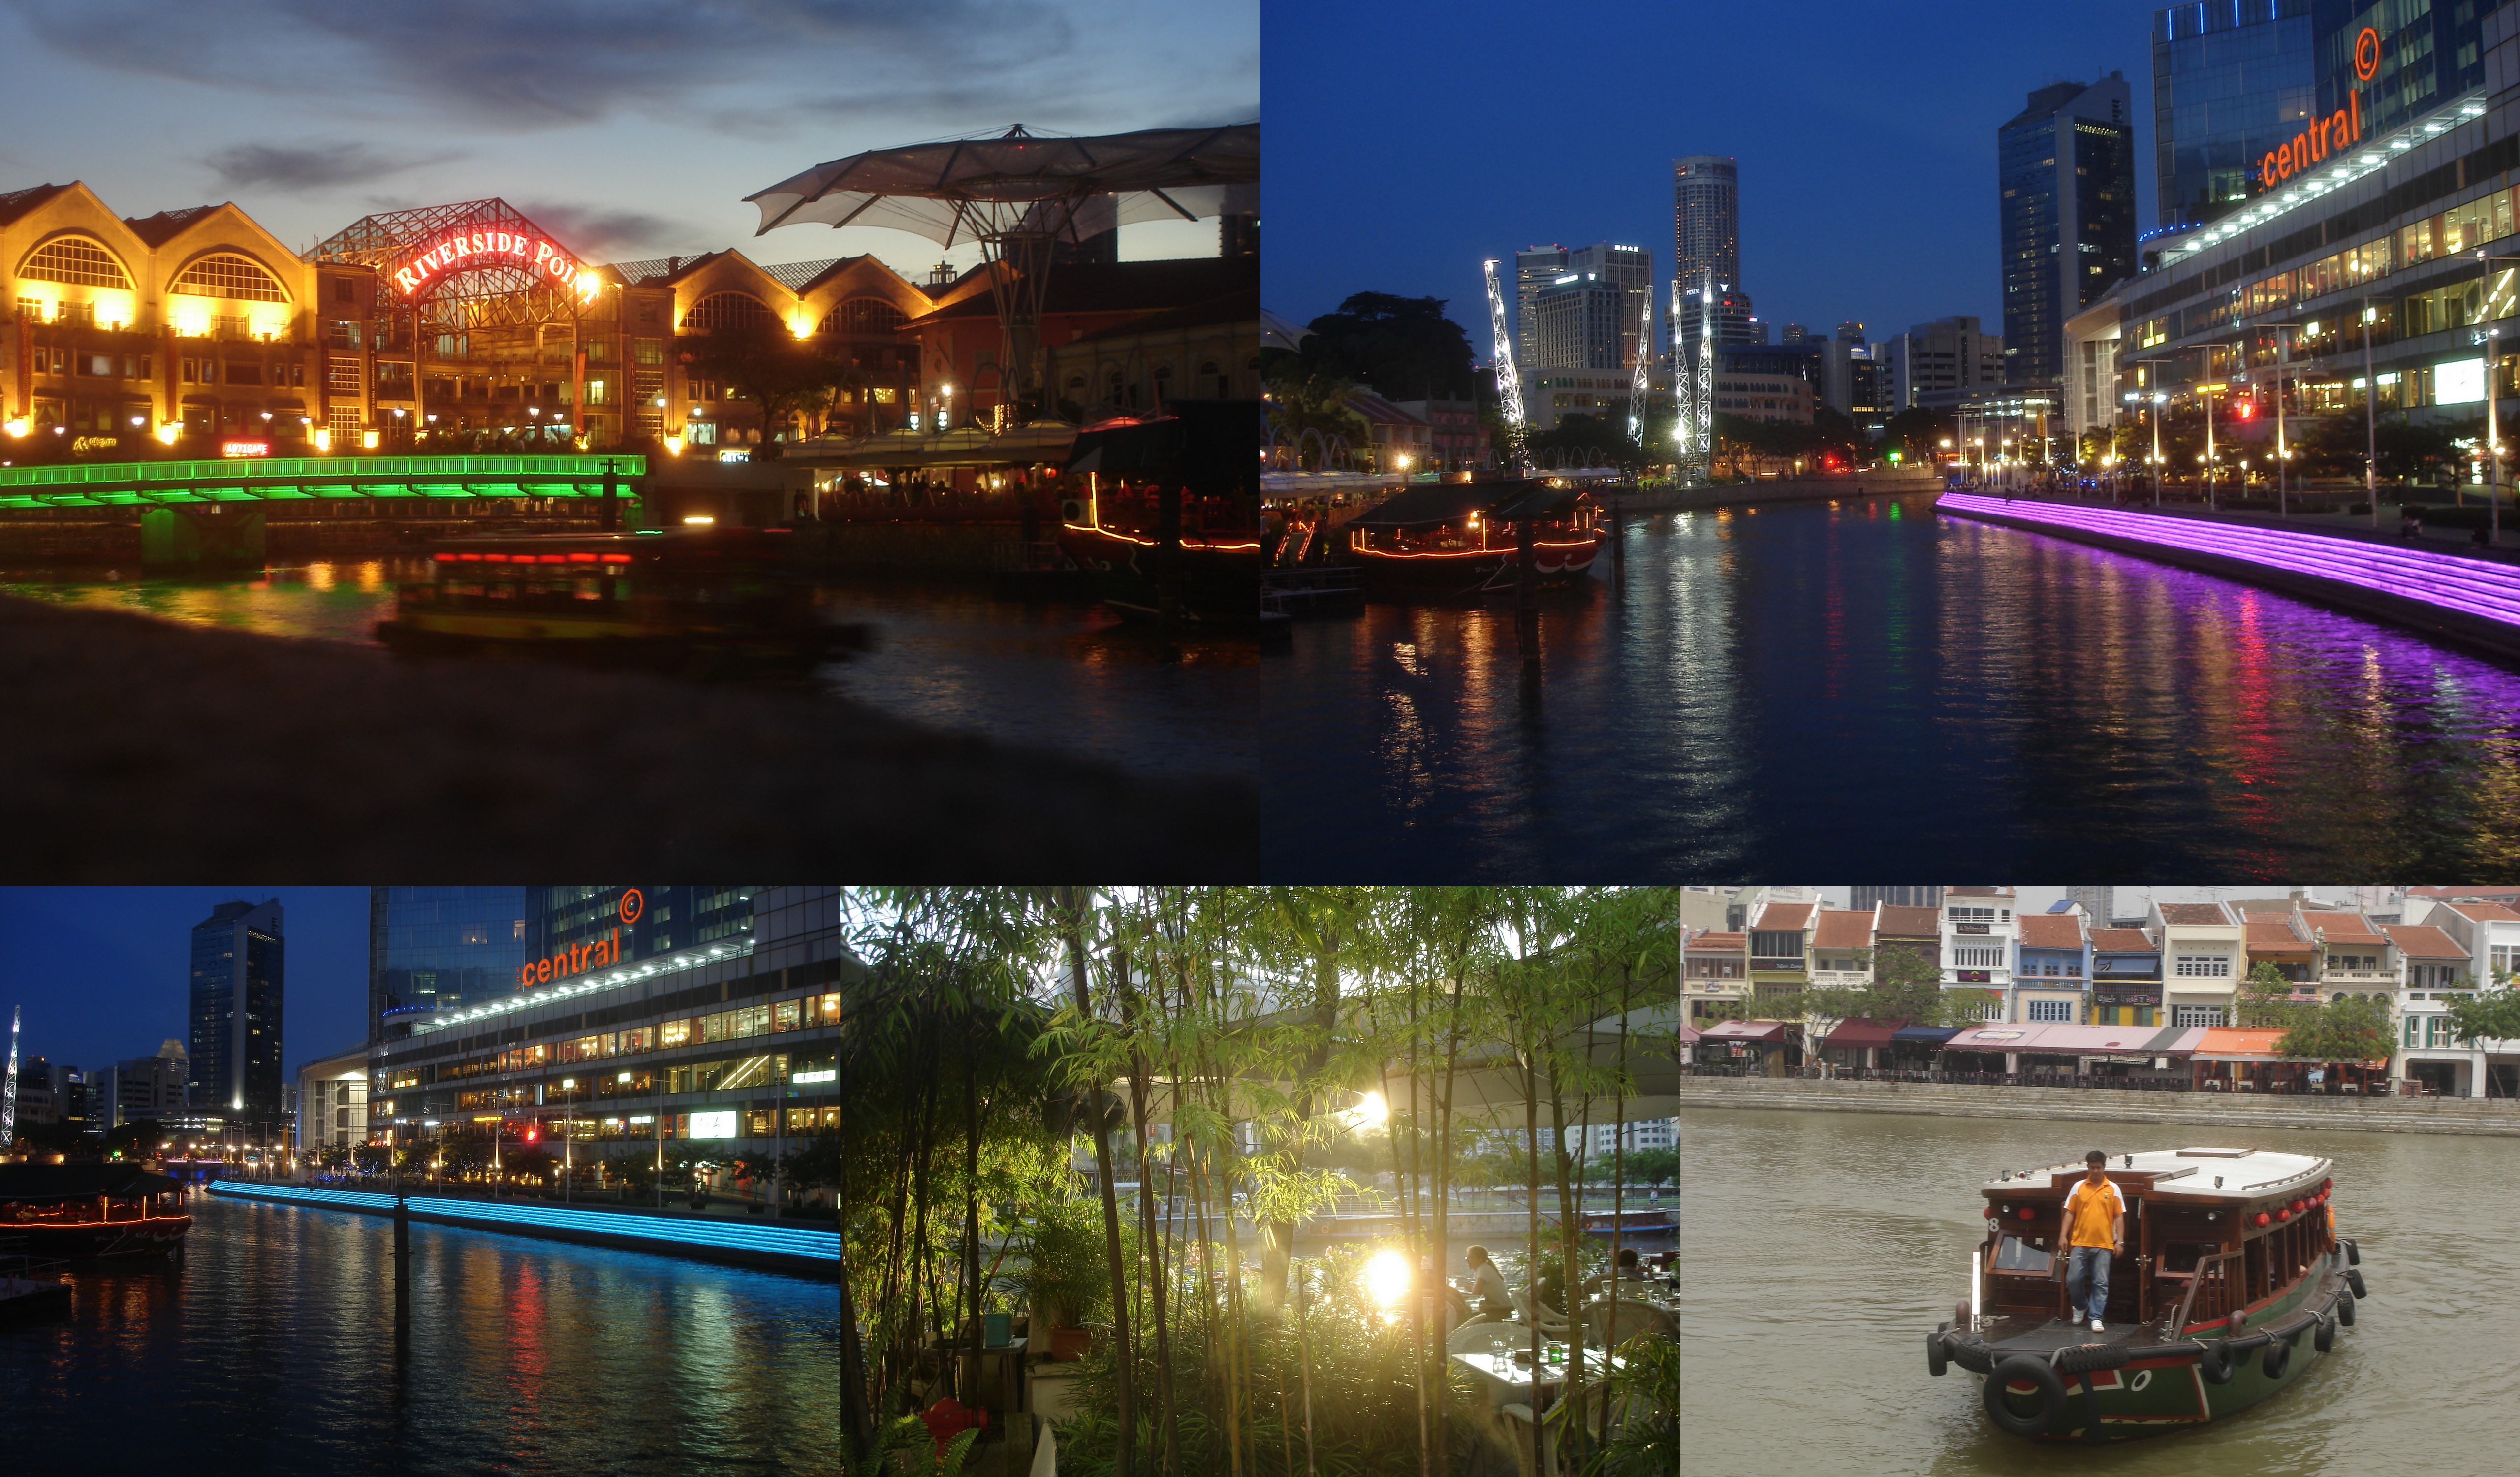 Singapore River | What Matters